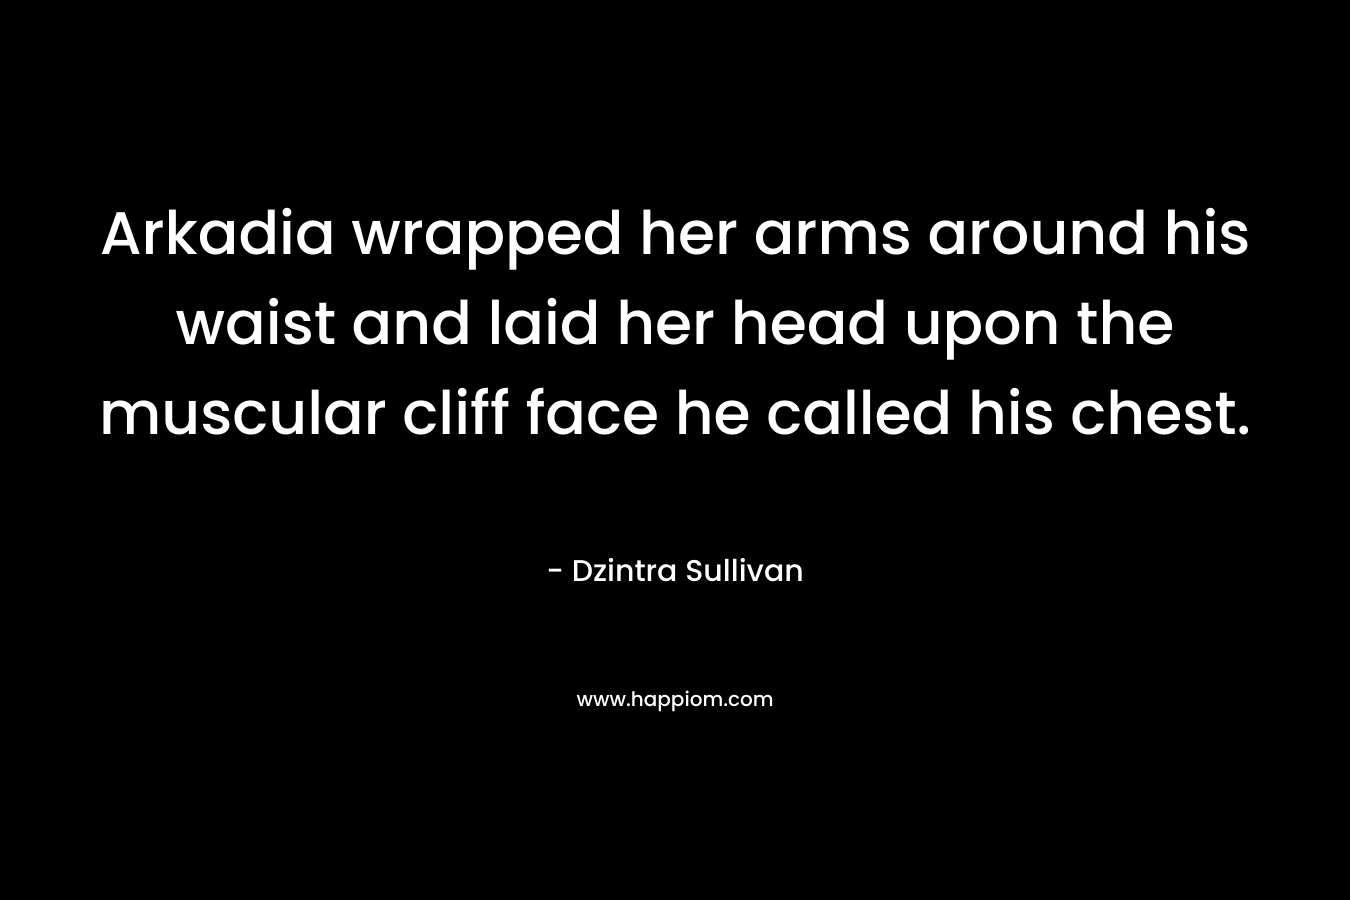 Arkadia wrapped her arms around his waist and laid her head upon the muscular cliff face he called his chest. – Dzintra Sullivan